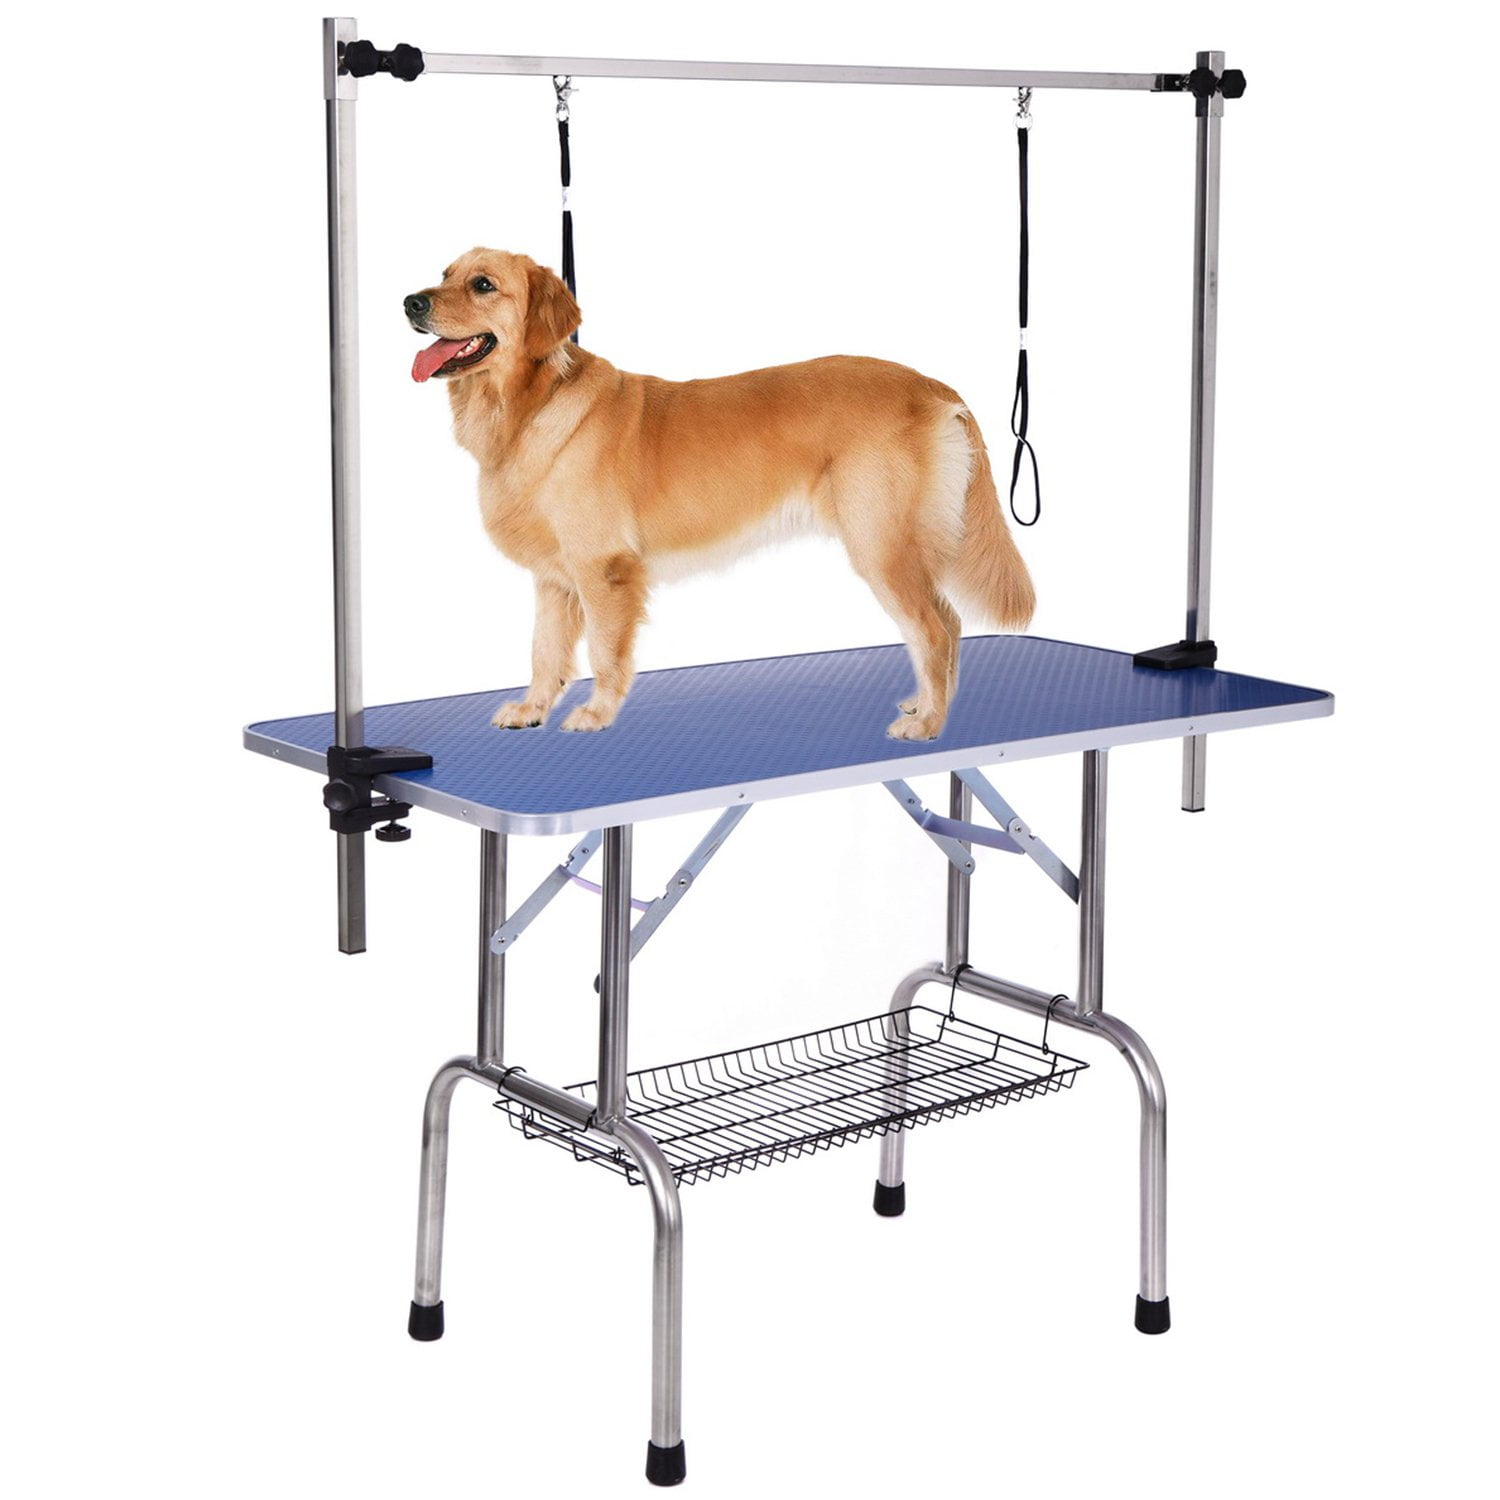  Dog Grooming Table  The ultimate guide 